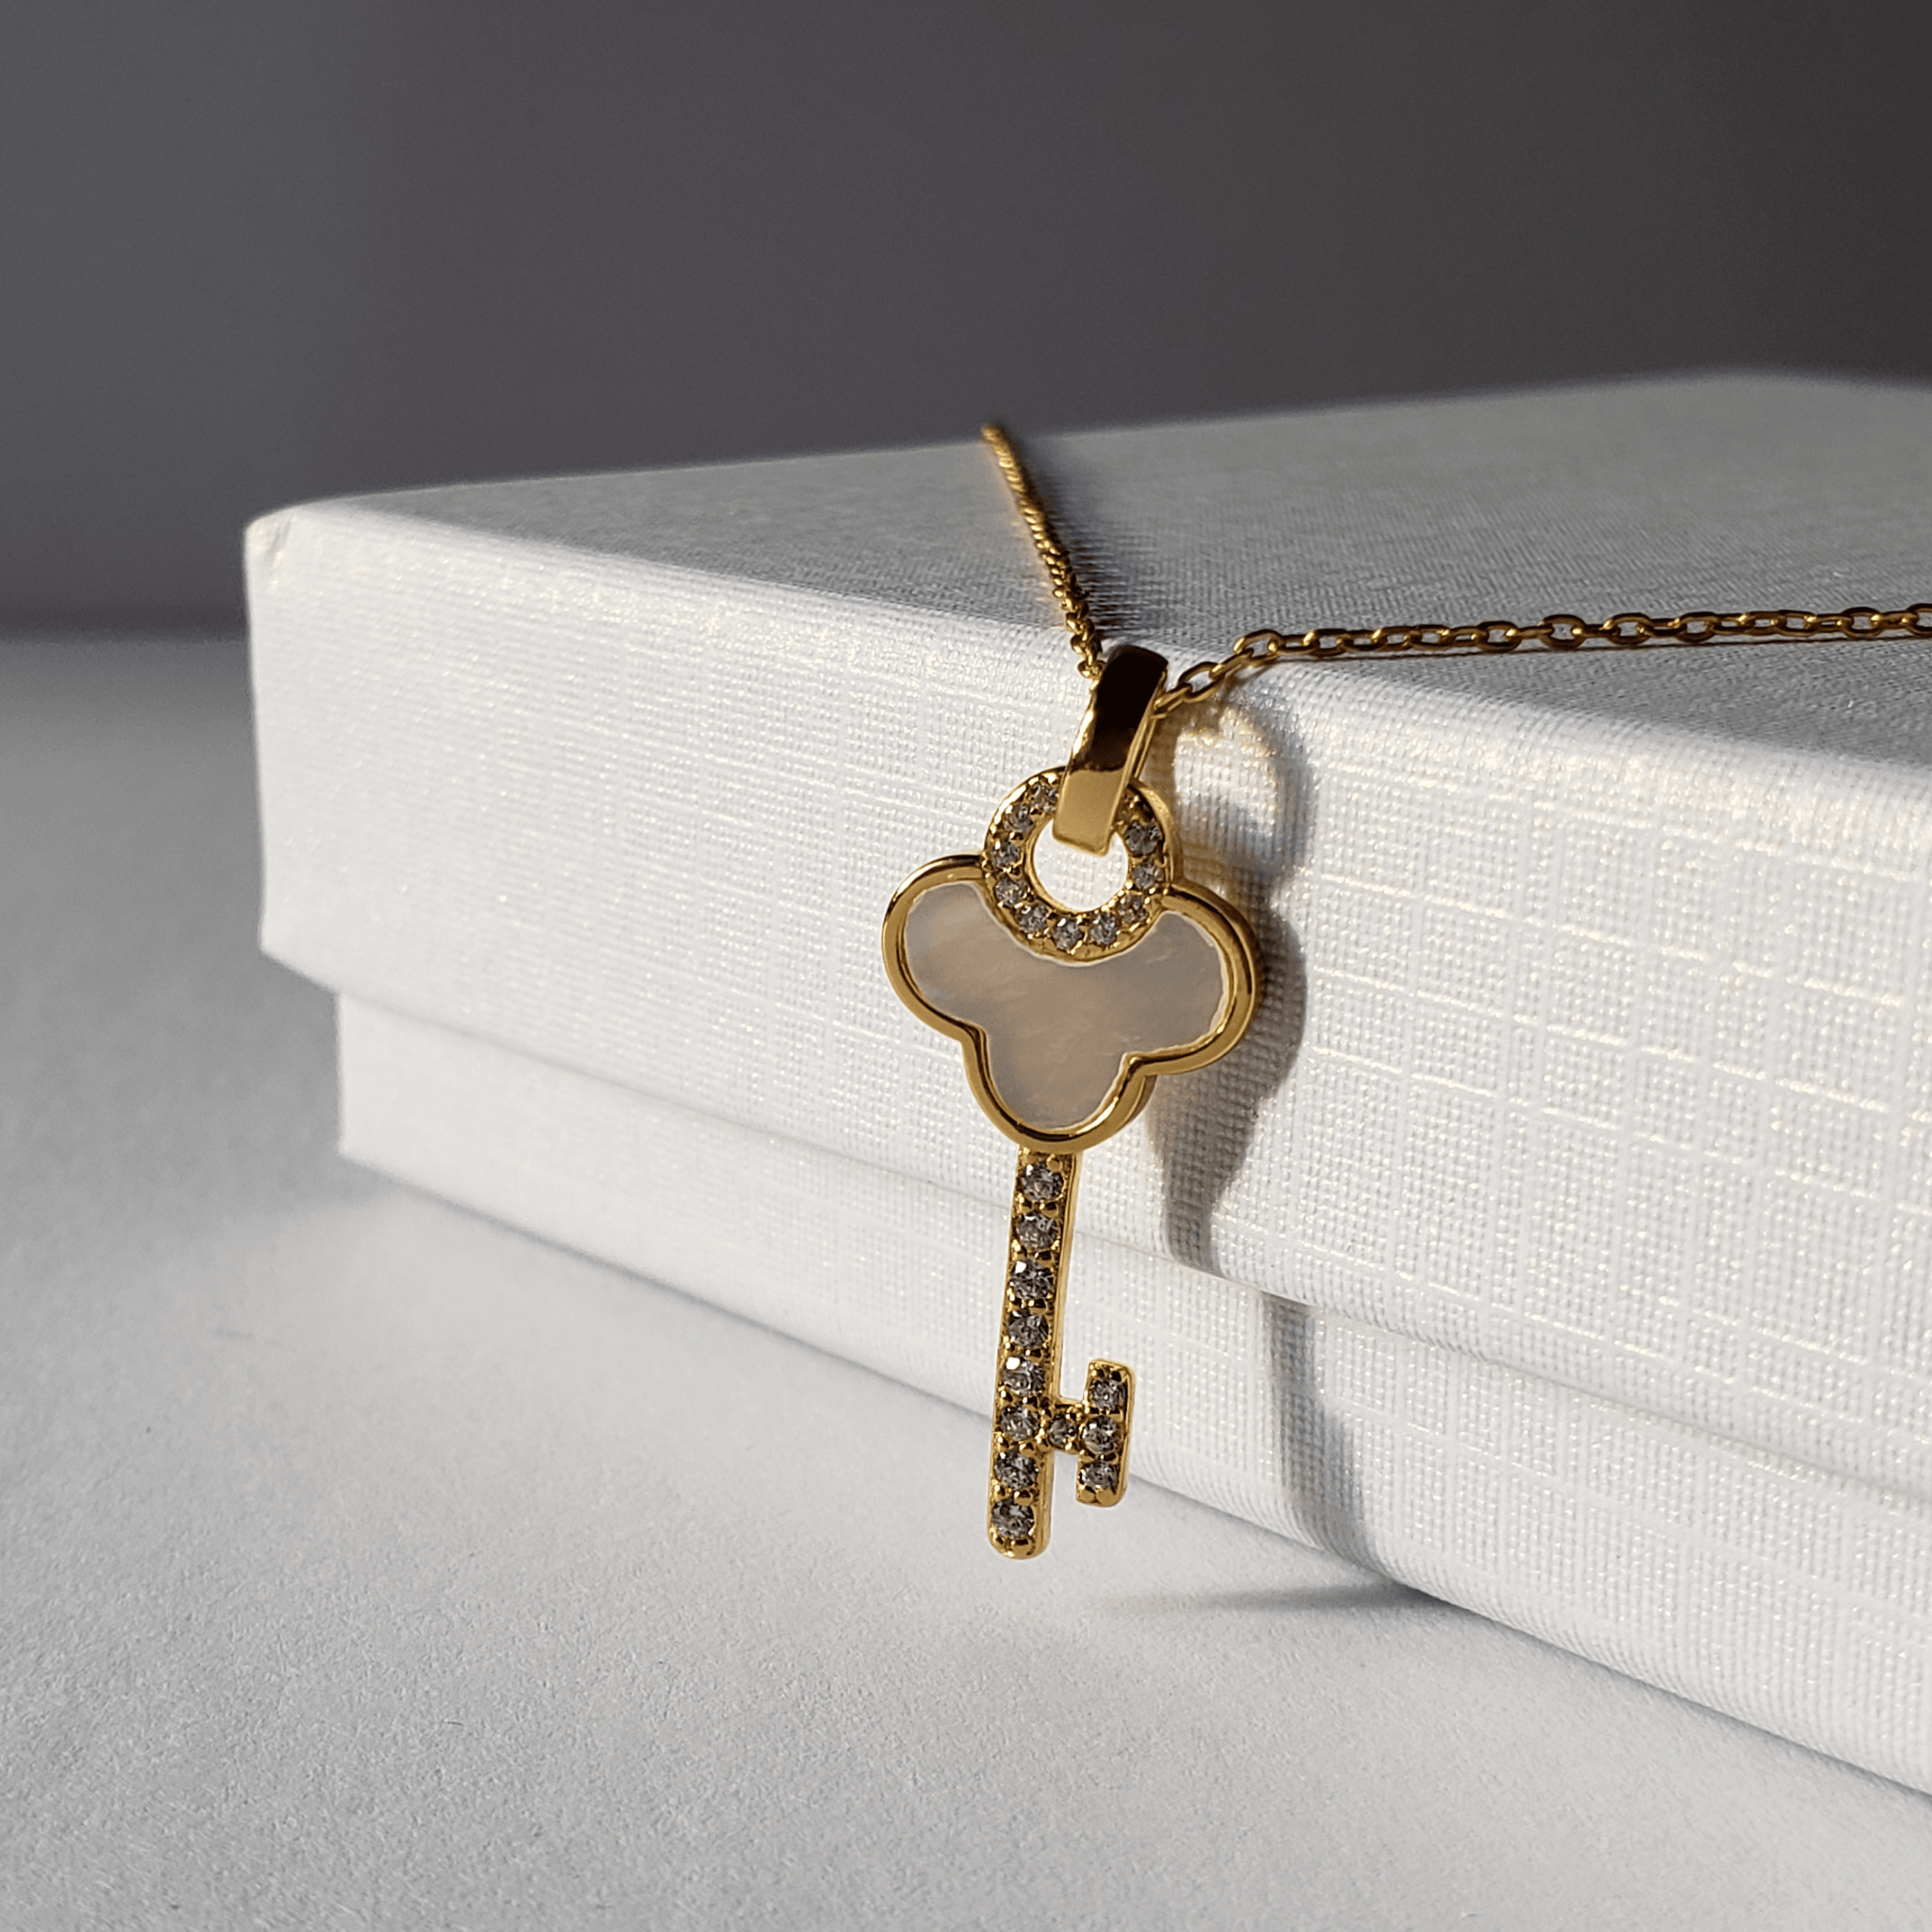 Mother of Pearl Key Necklace 925 Silver • Gold Vermeil Key Pendant, Silver  Key, Delicate Necklace Sterling Silver